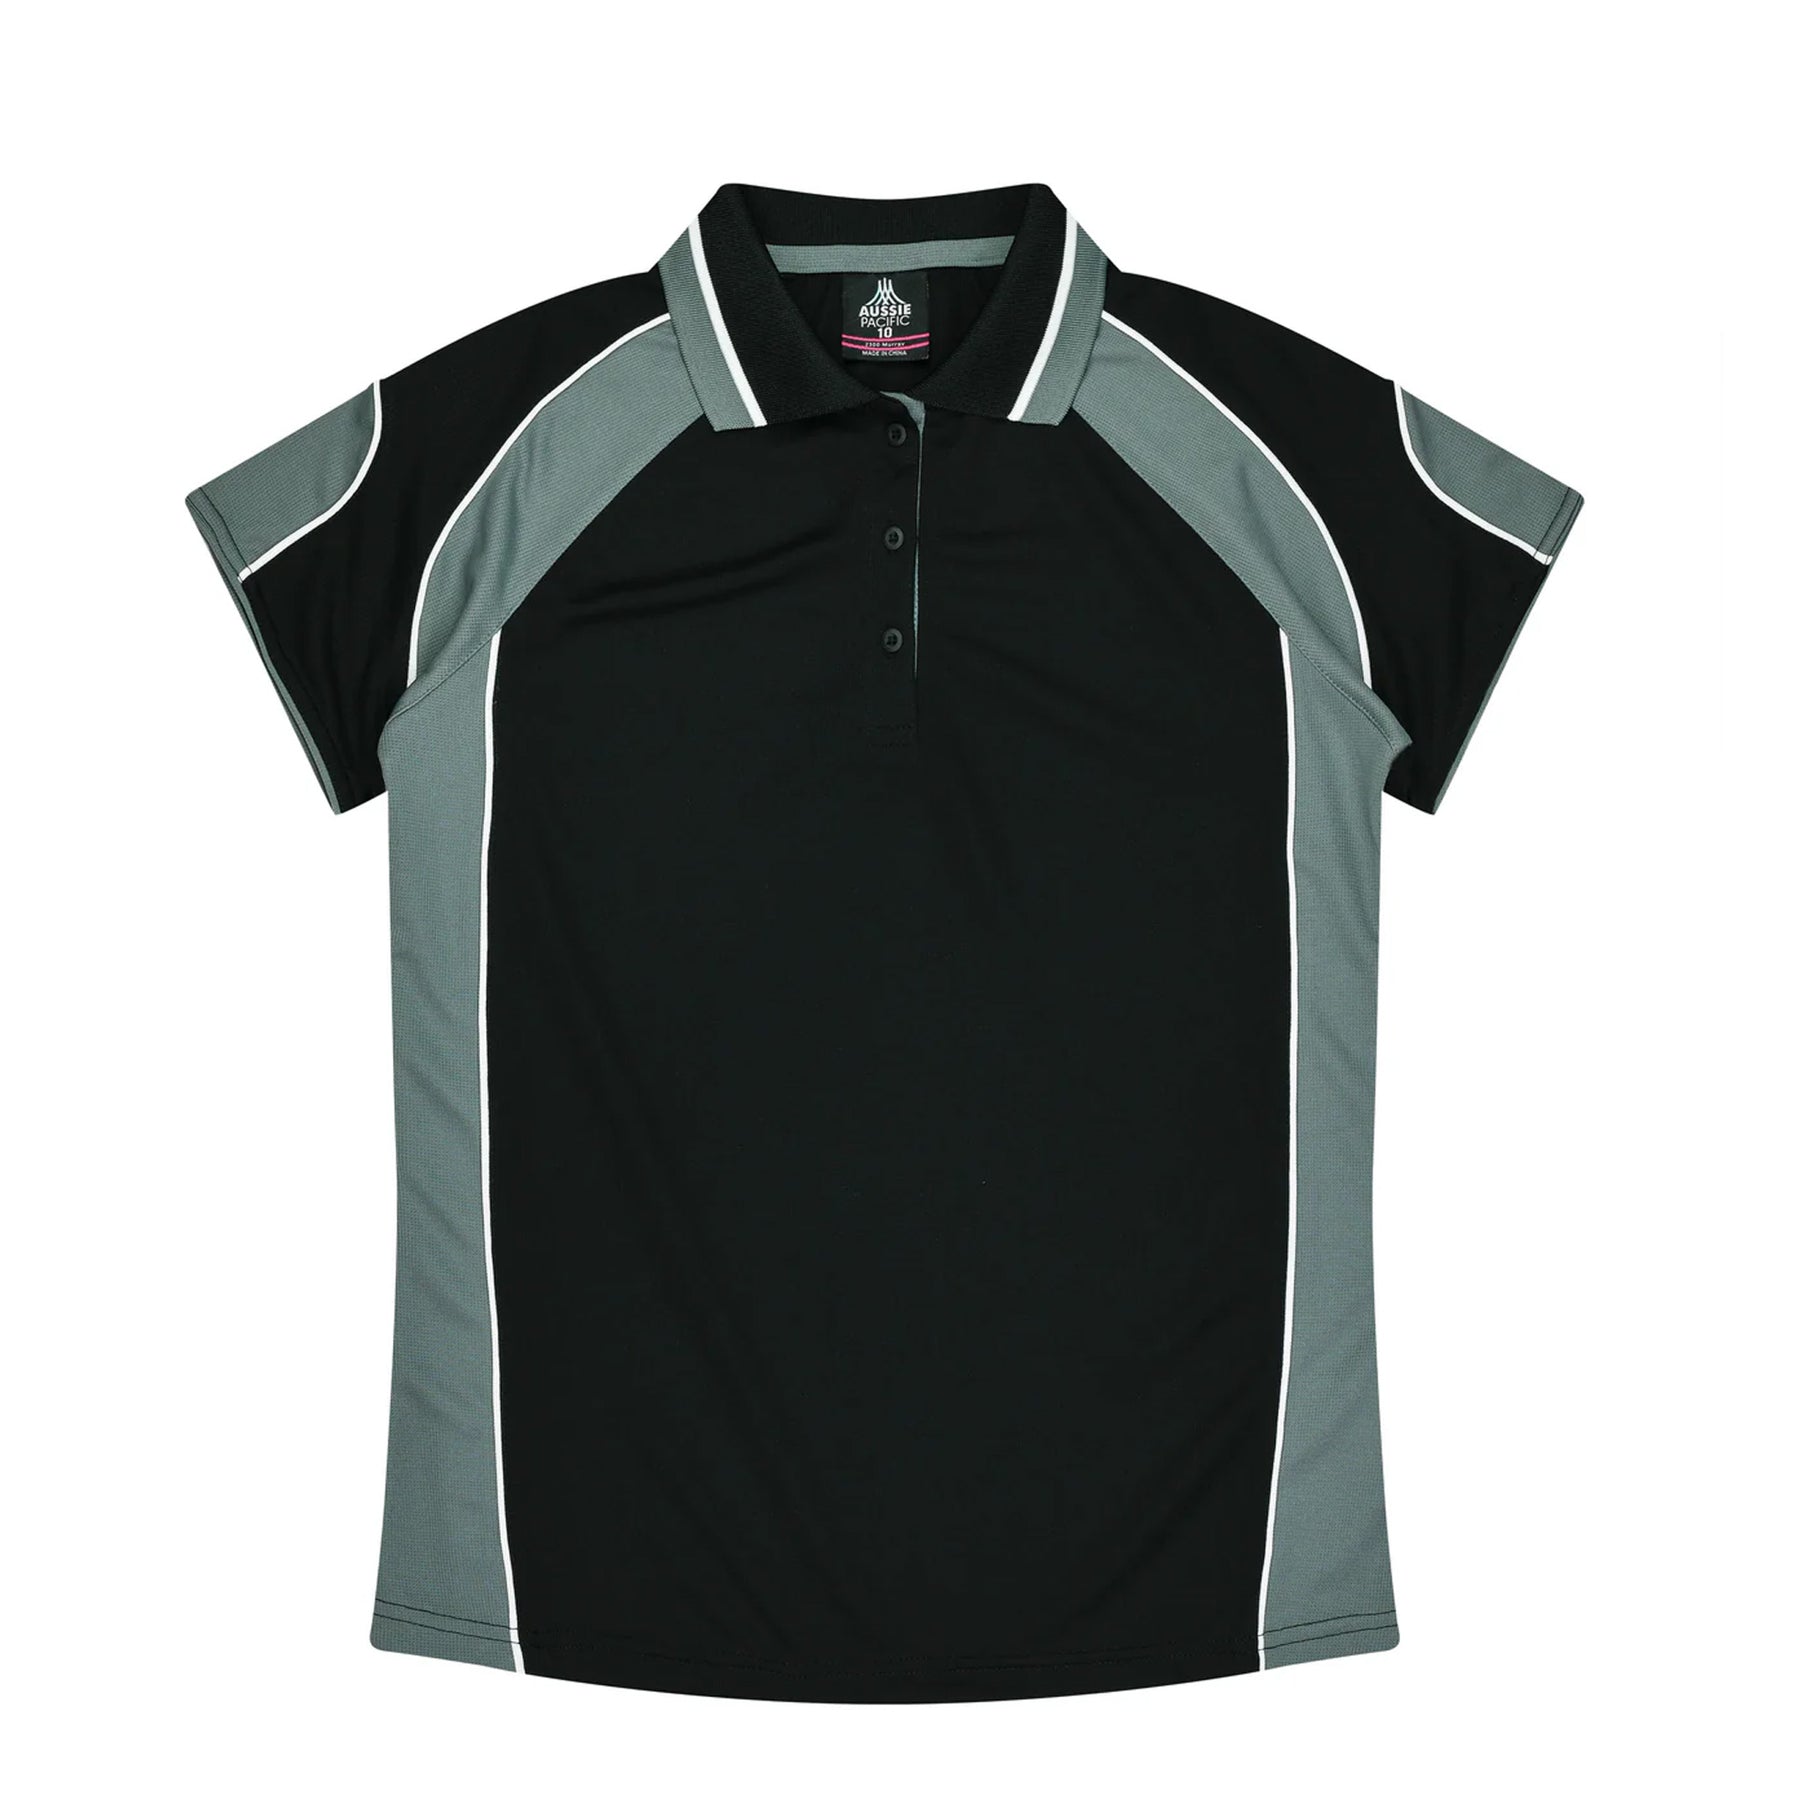 aussie pacific murray ladies polo in black ashe